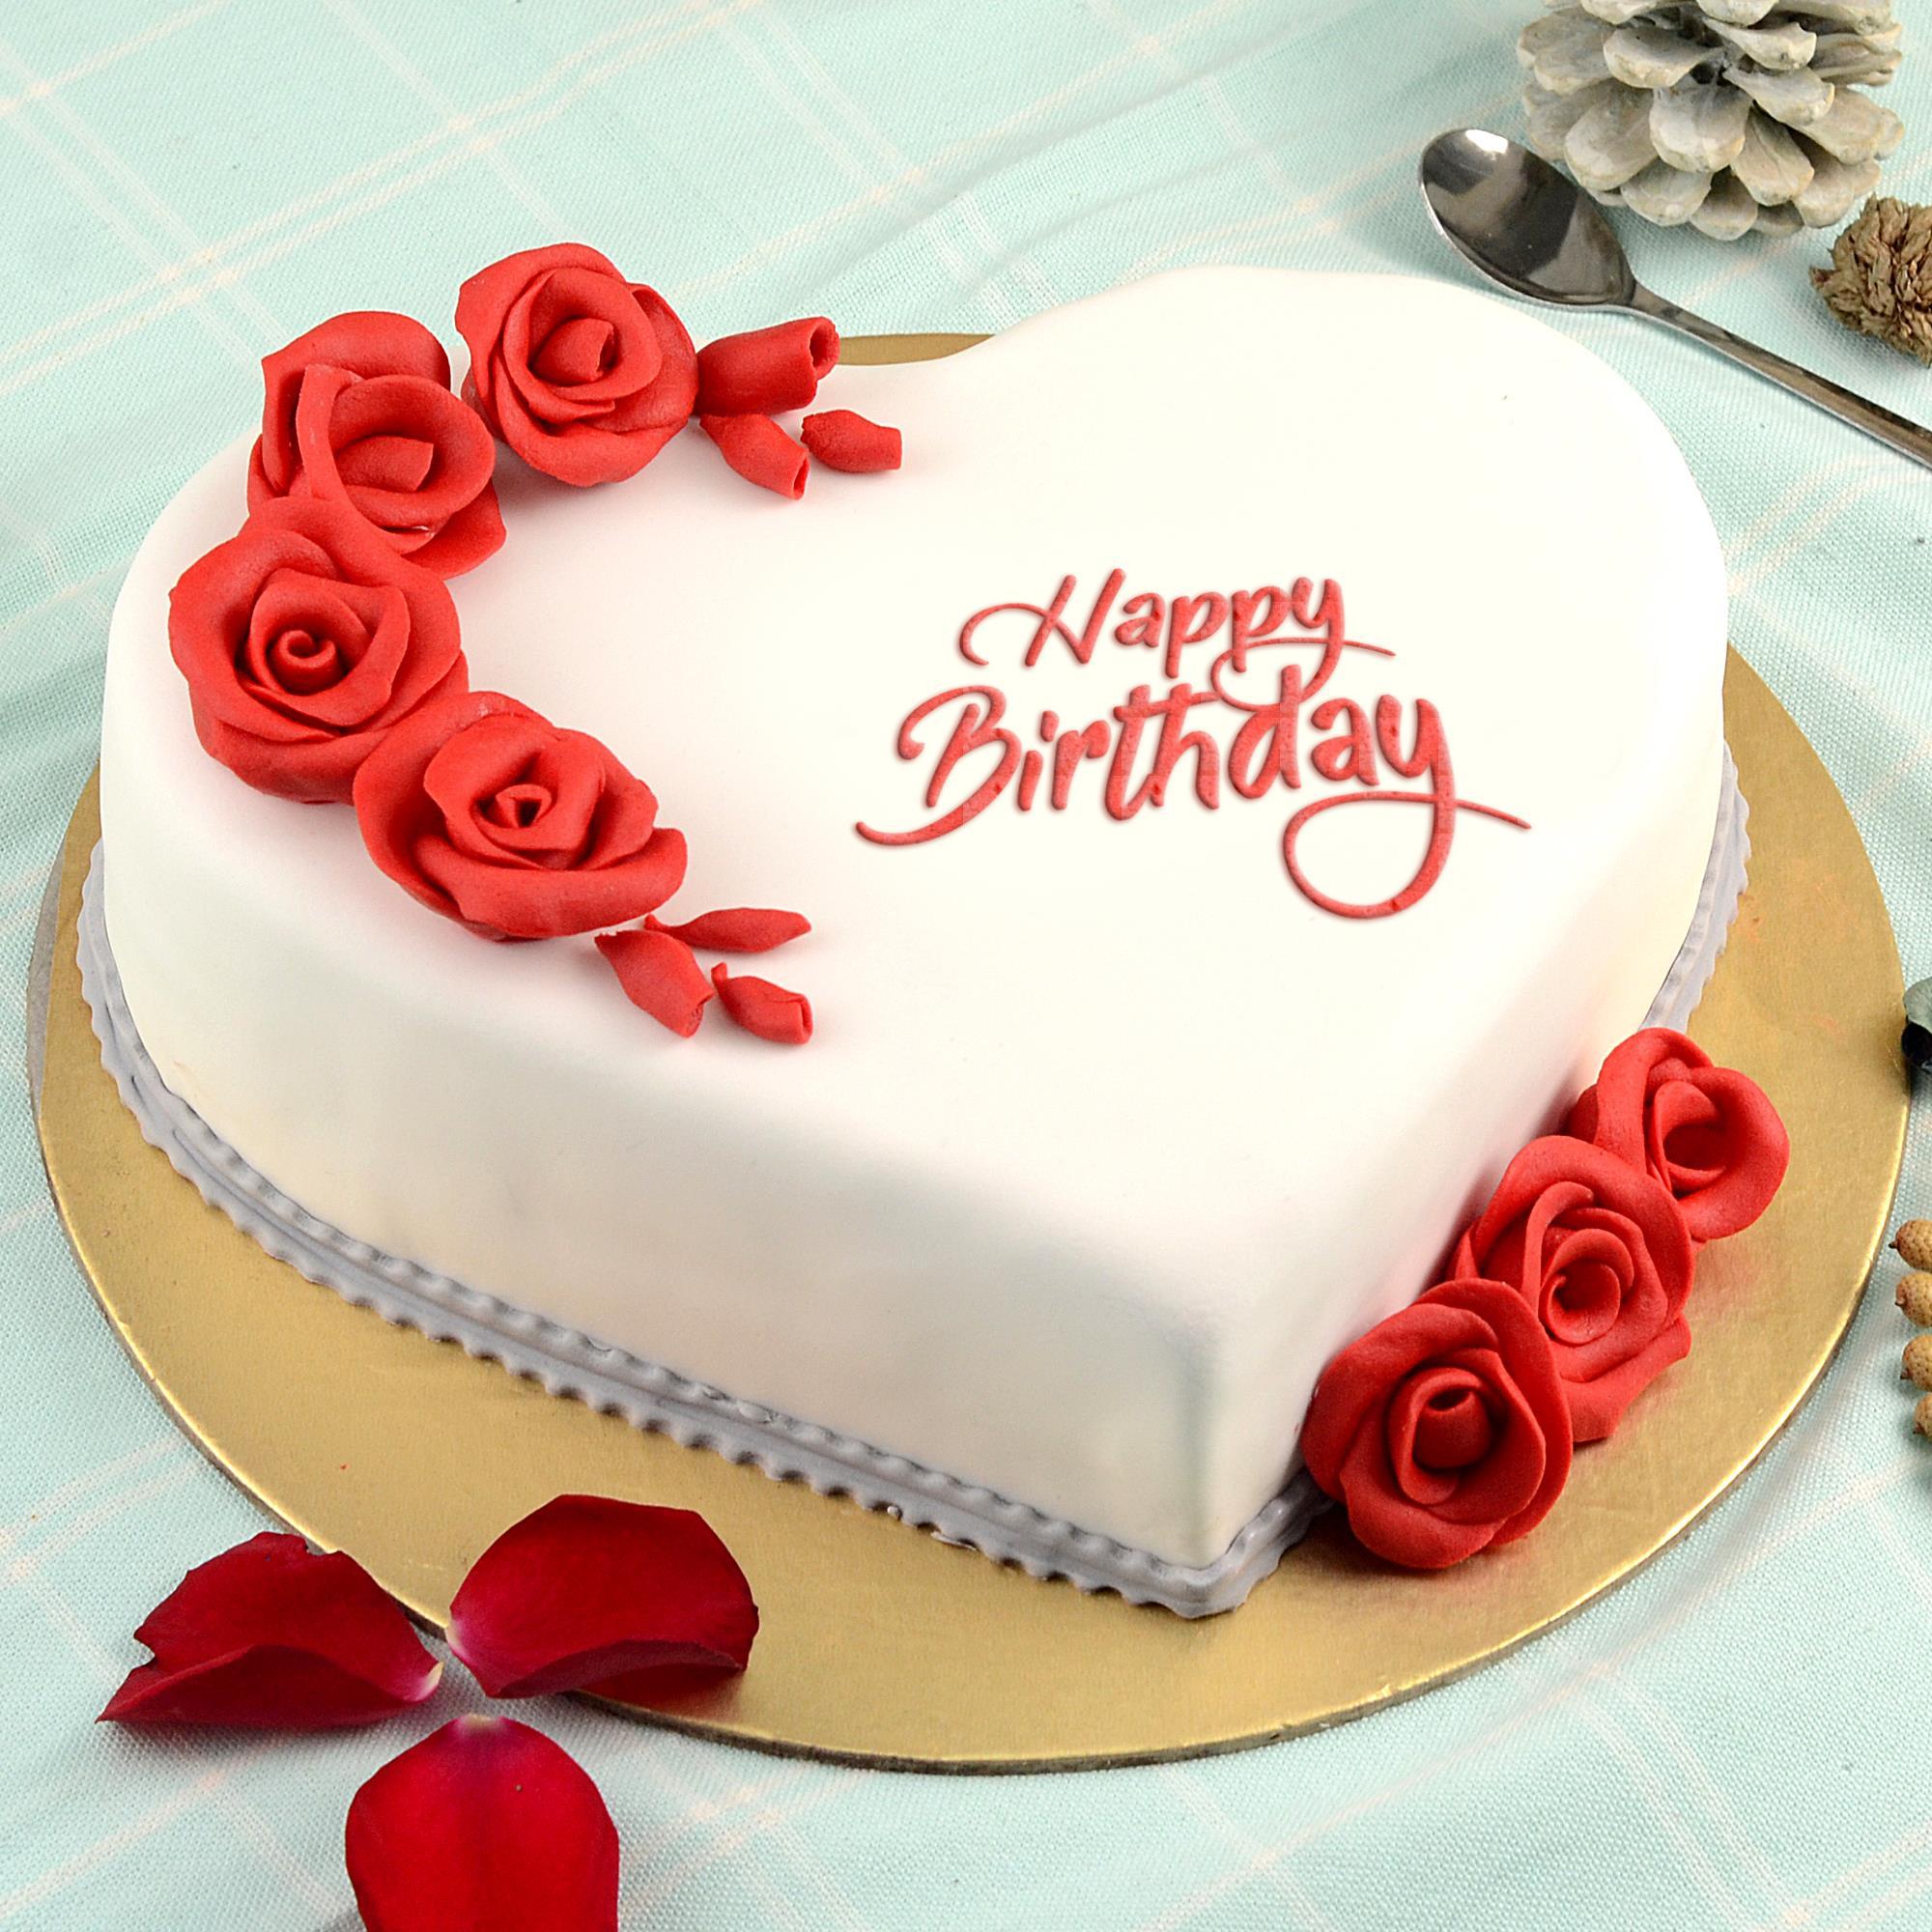 Popular Indian Occasions for Gifting a Cake - Kingdom of Cakes